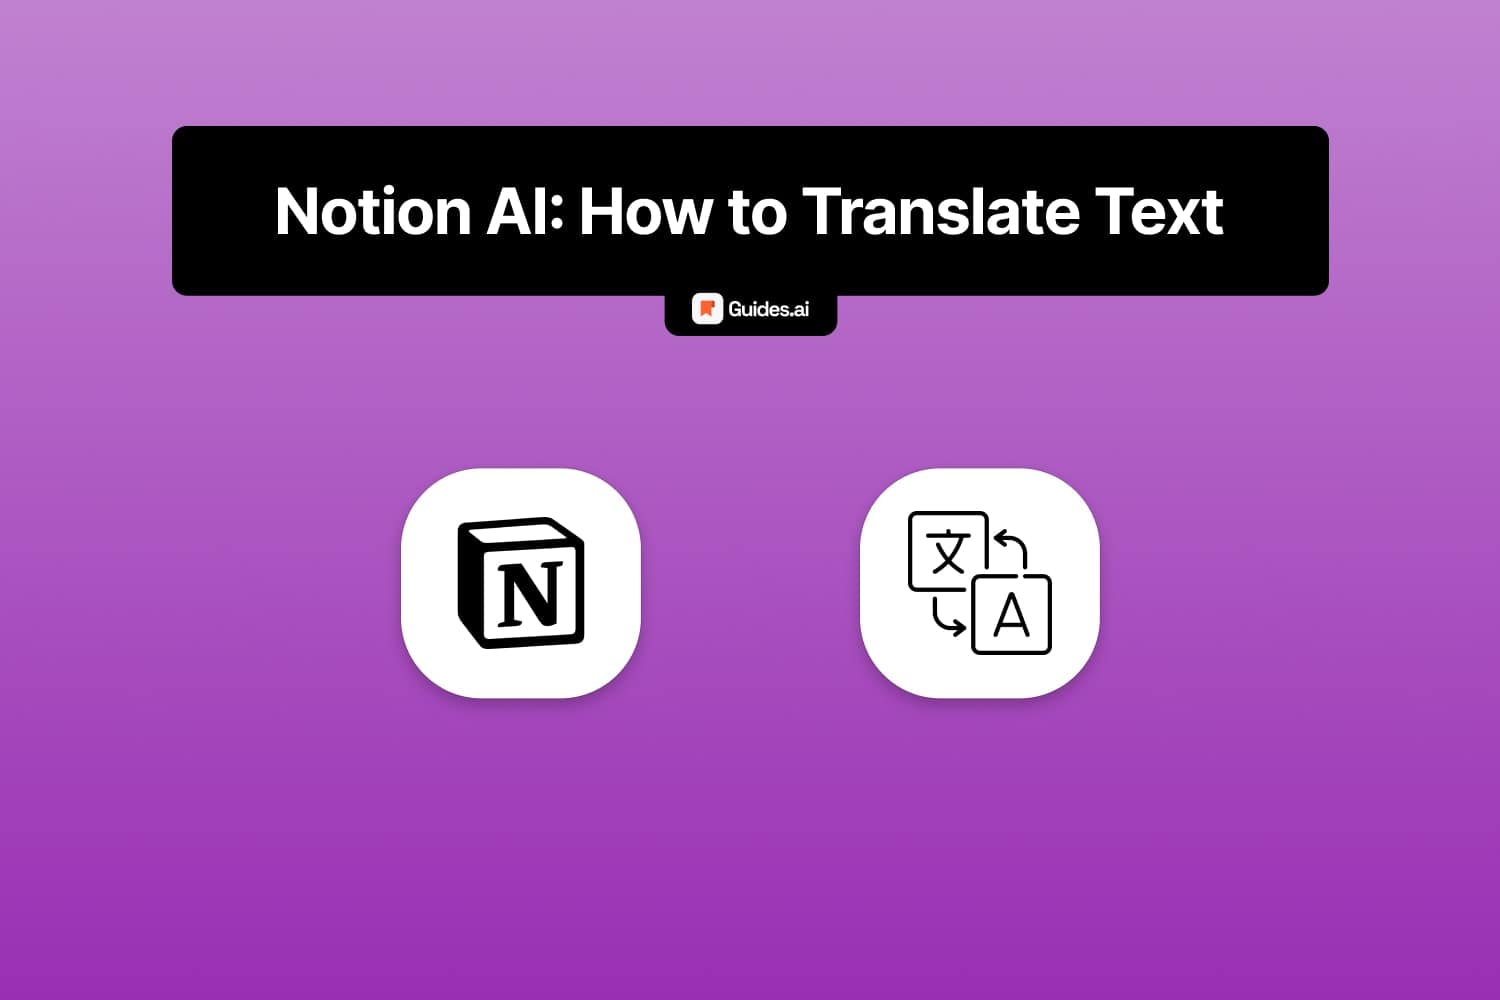 How to translate text with Notion AI